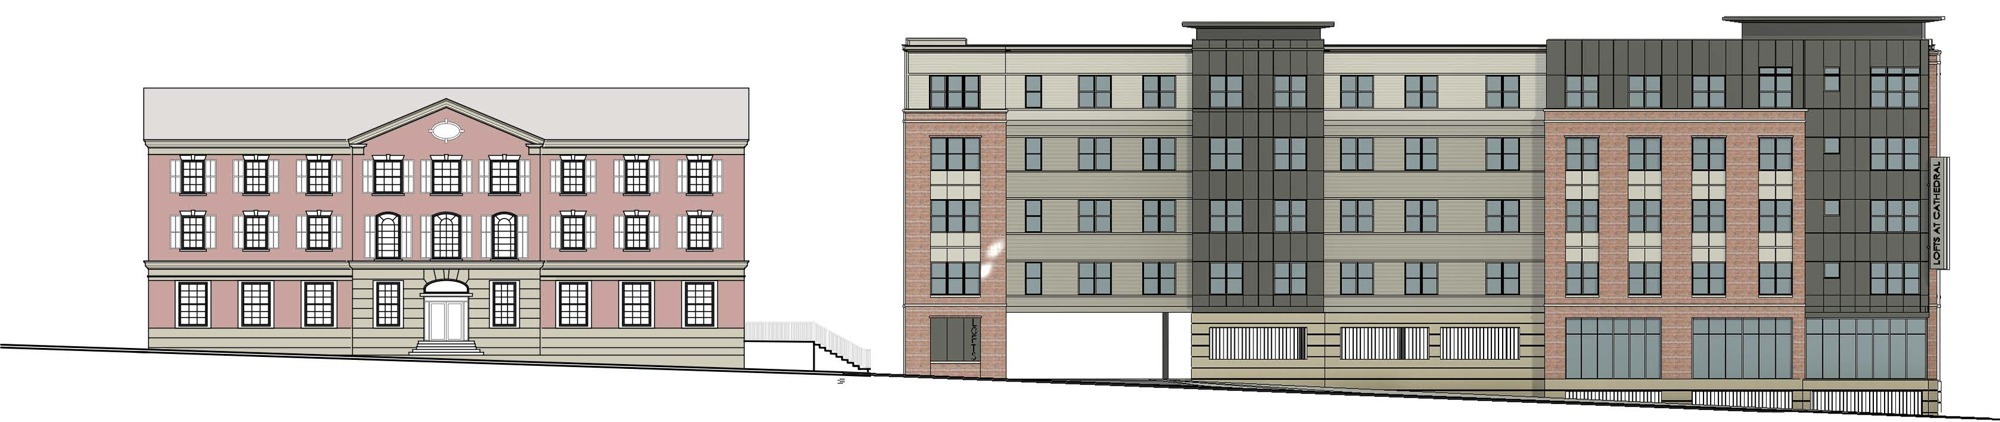 The 120-unit apartment complex will add new construction to a renovated historic YWCA building bounded by Church, Liberty and Duval streets and Shields Place.